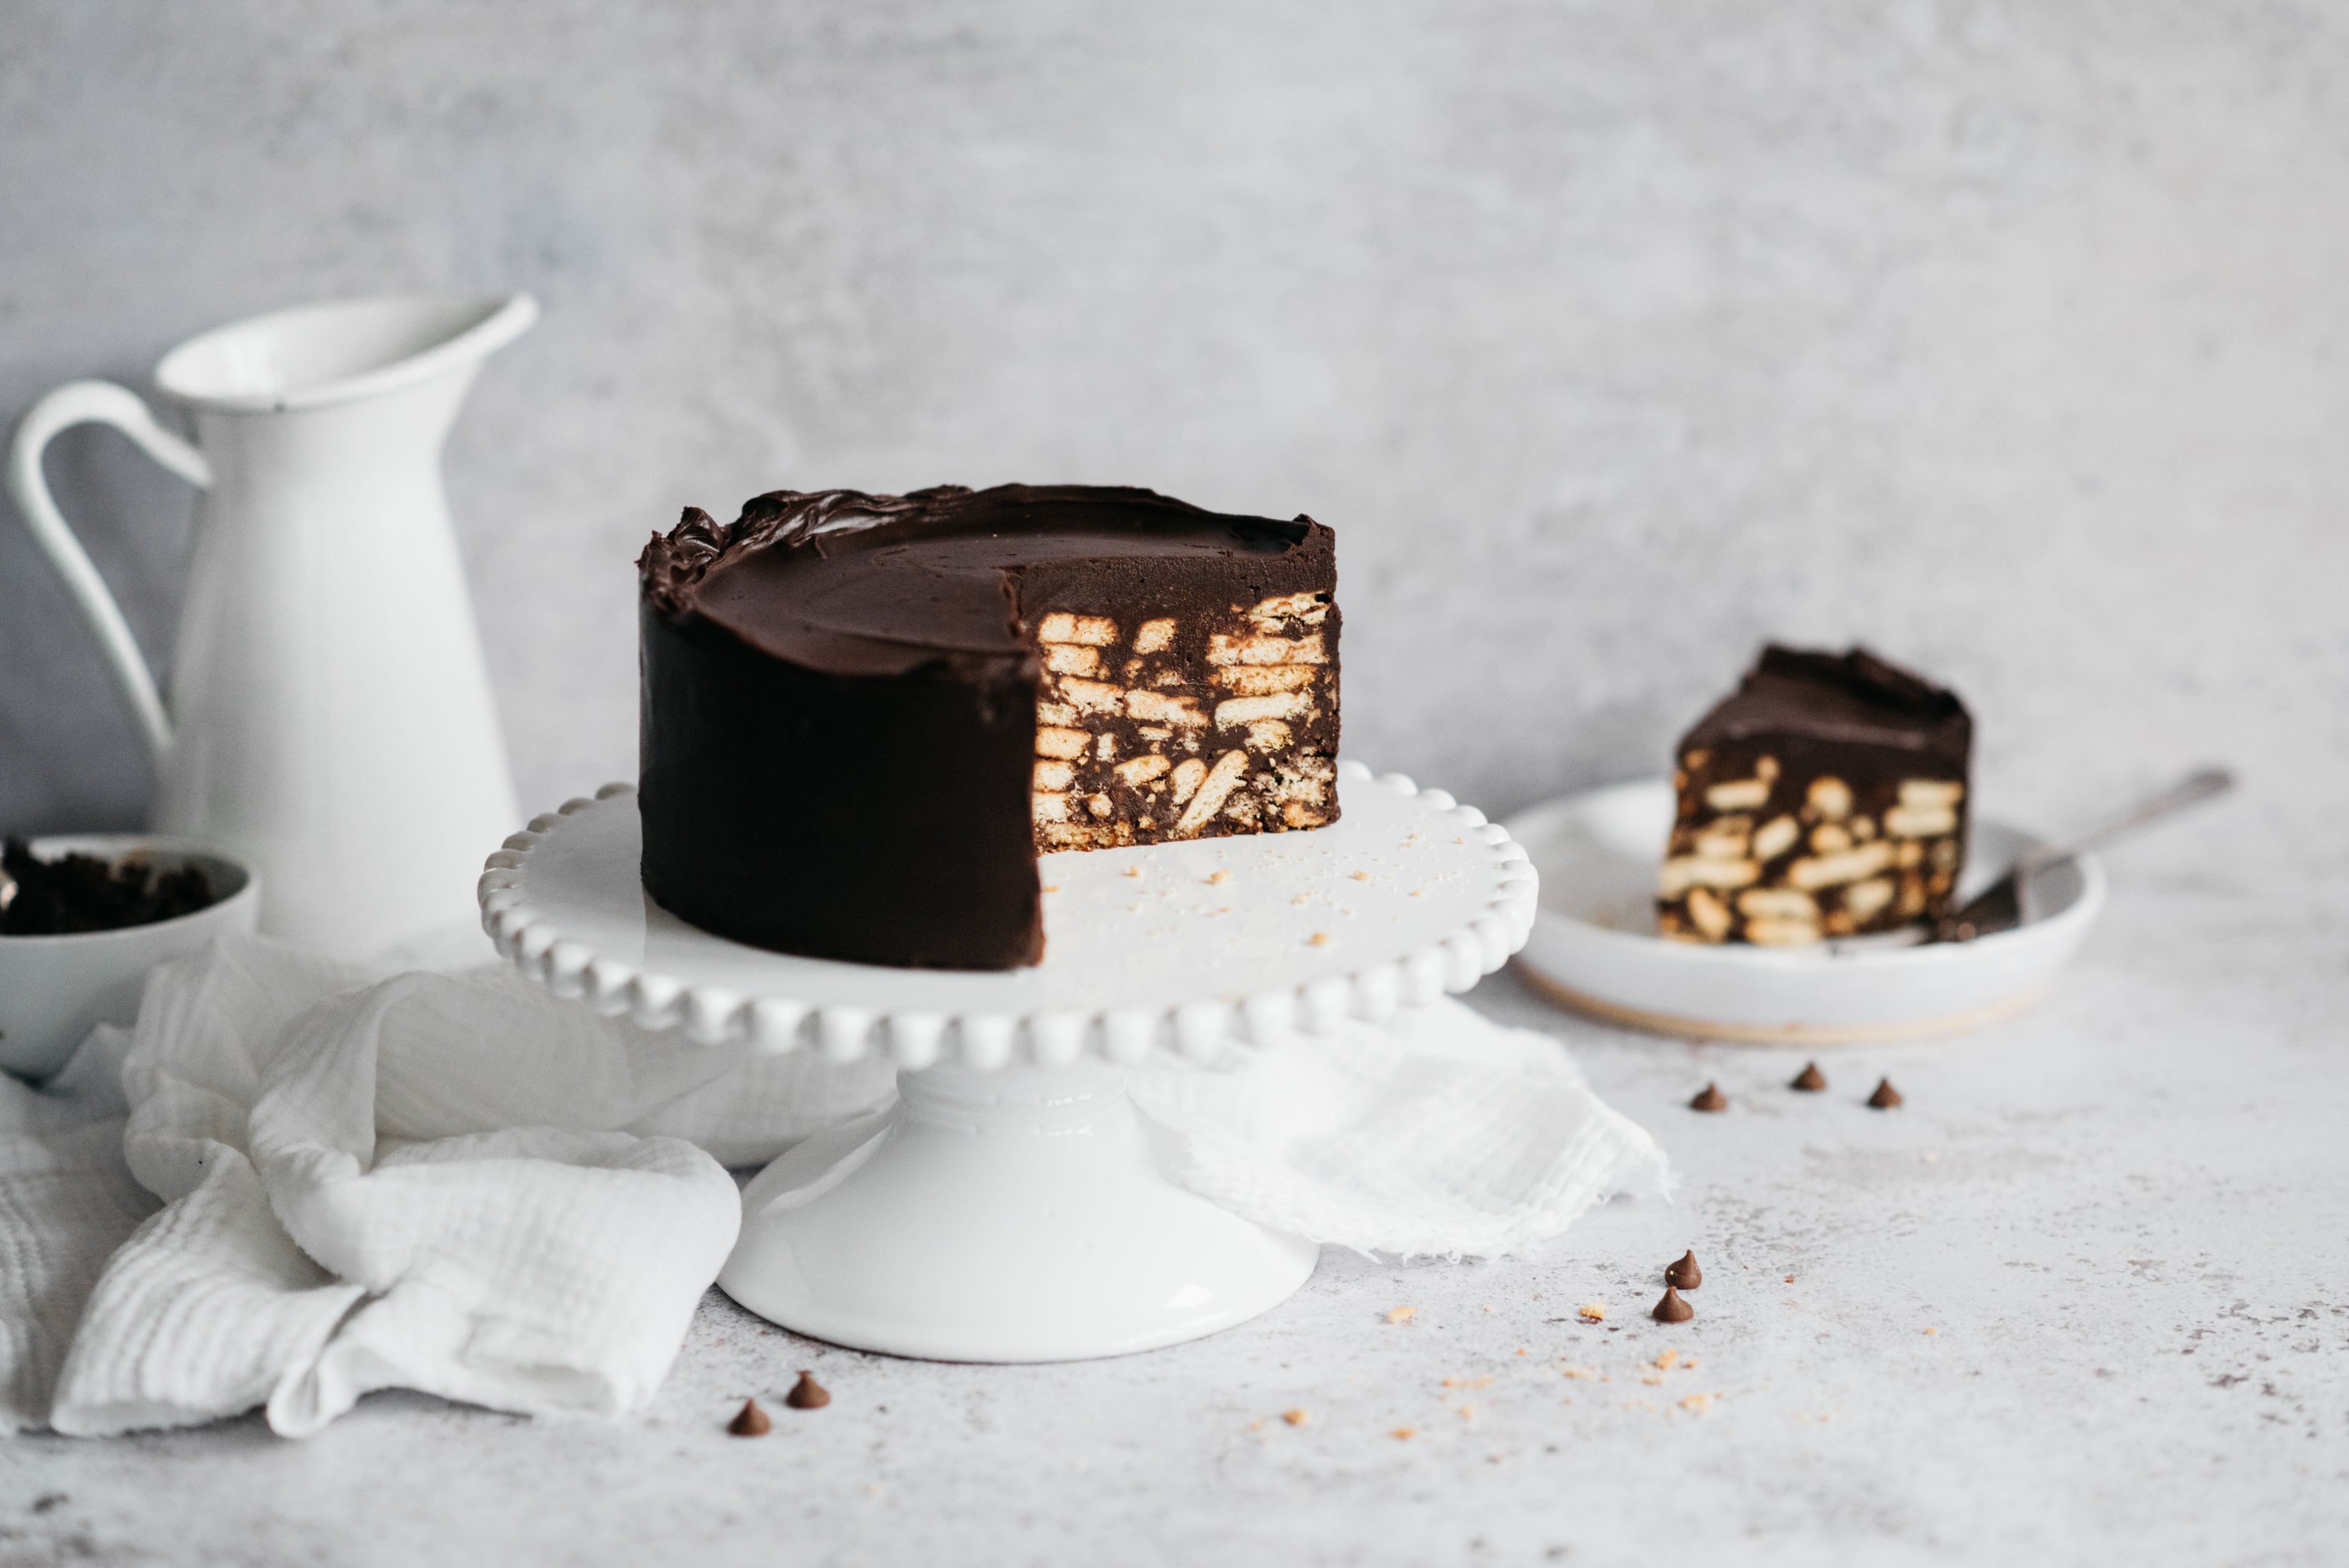 Chocolate Biscuit Cake on a cake stand showing the biscuit inside with chocolate ganache coating